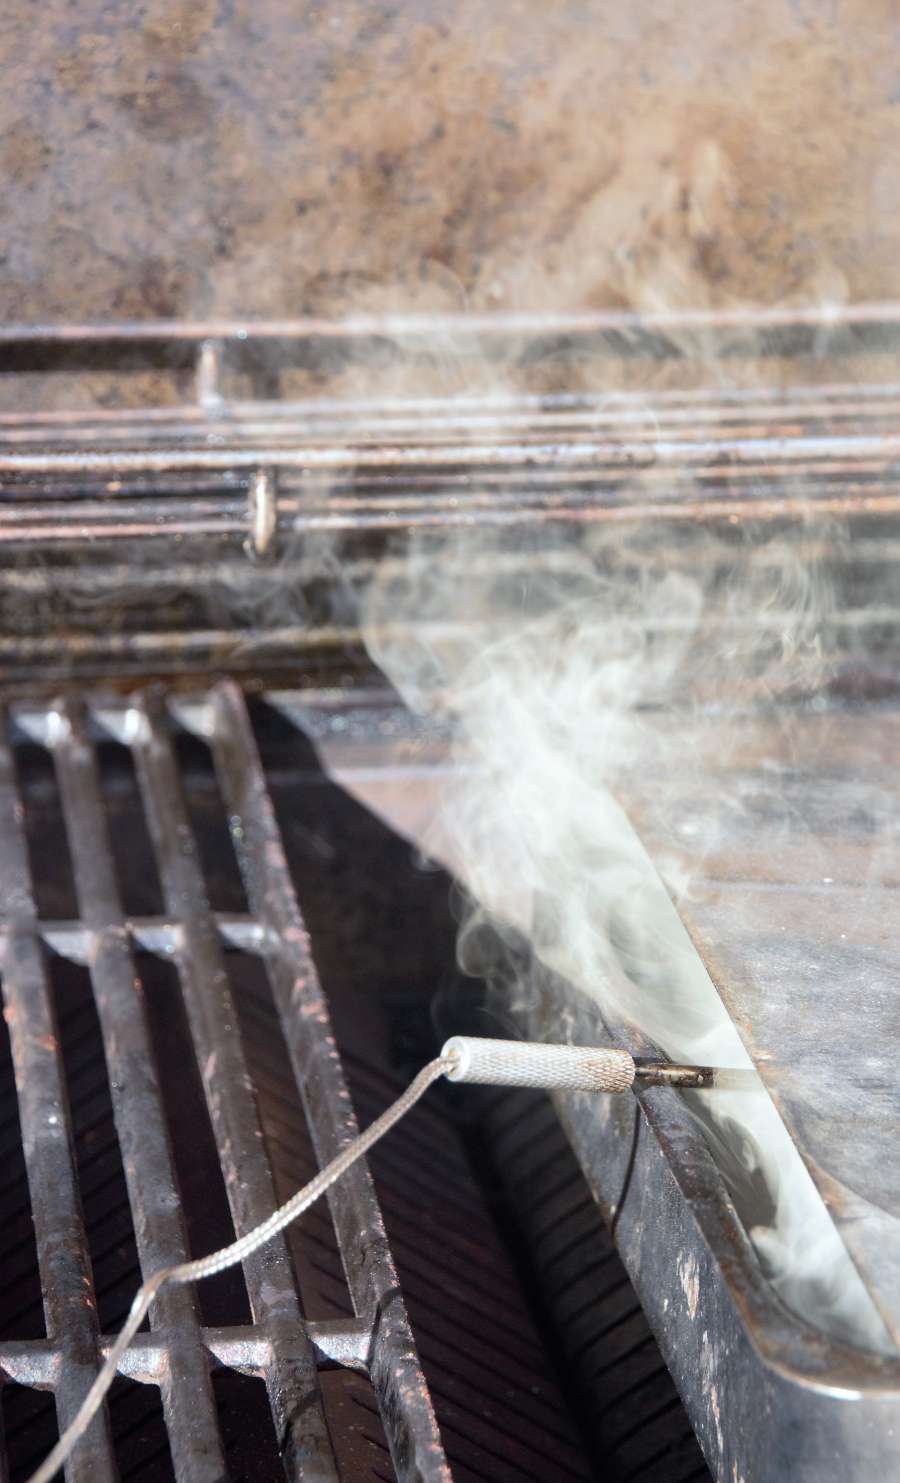 A close-up of a steaming grill with smoke rising, indicating something is cooking or the grill is being preheated.